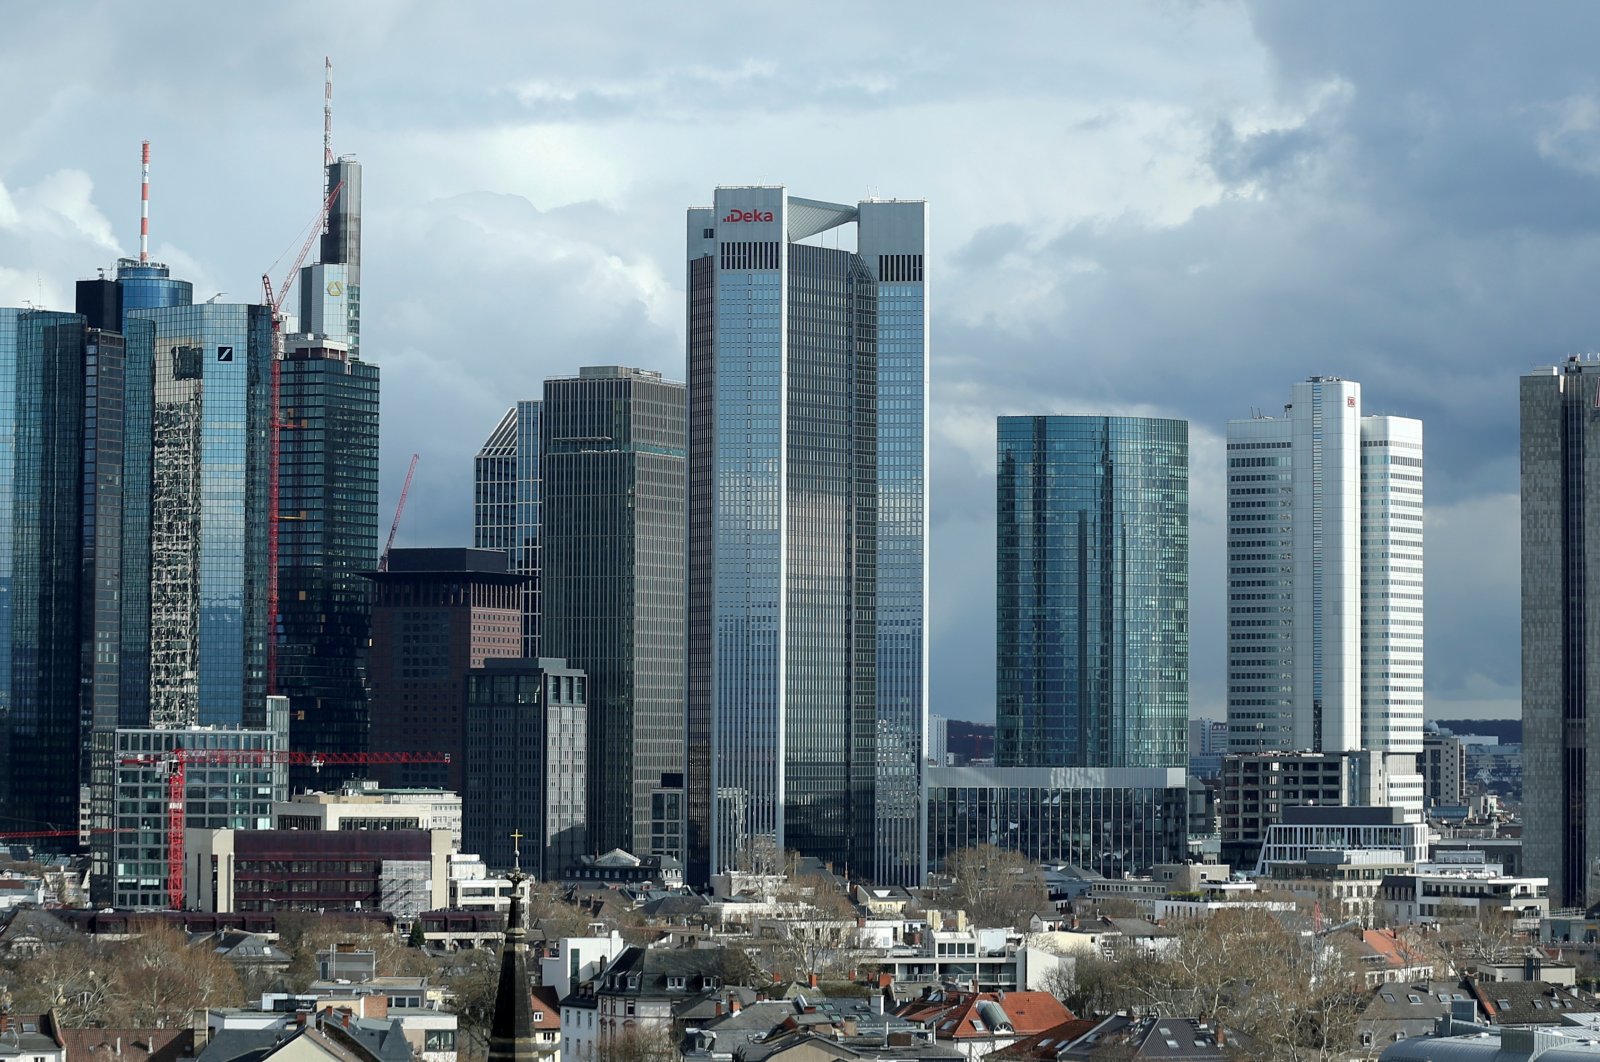 The financial district is pictured in Frankfurt, Germany, March 18, 2019. (Retuers Photo)